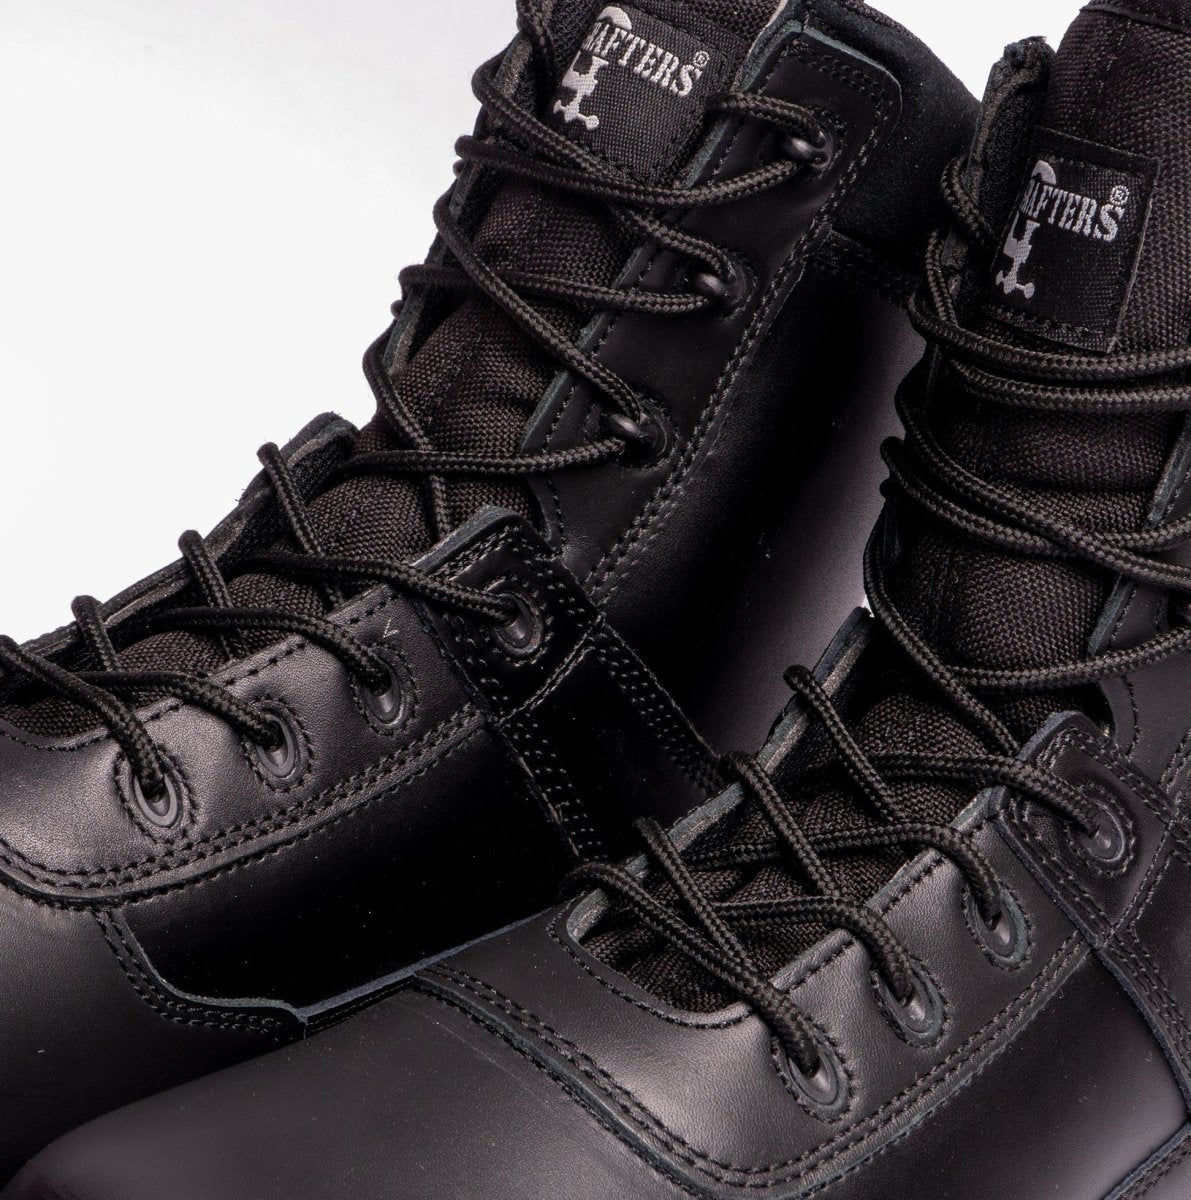 Grafters AMBUSH Unisex Leather Work Boots Black M107A - 3 | STB.co.uk